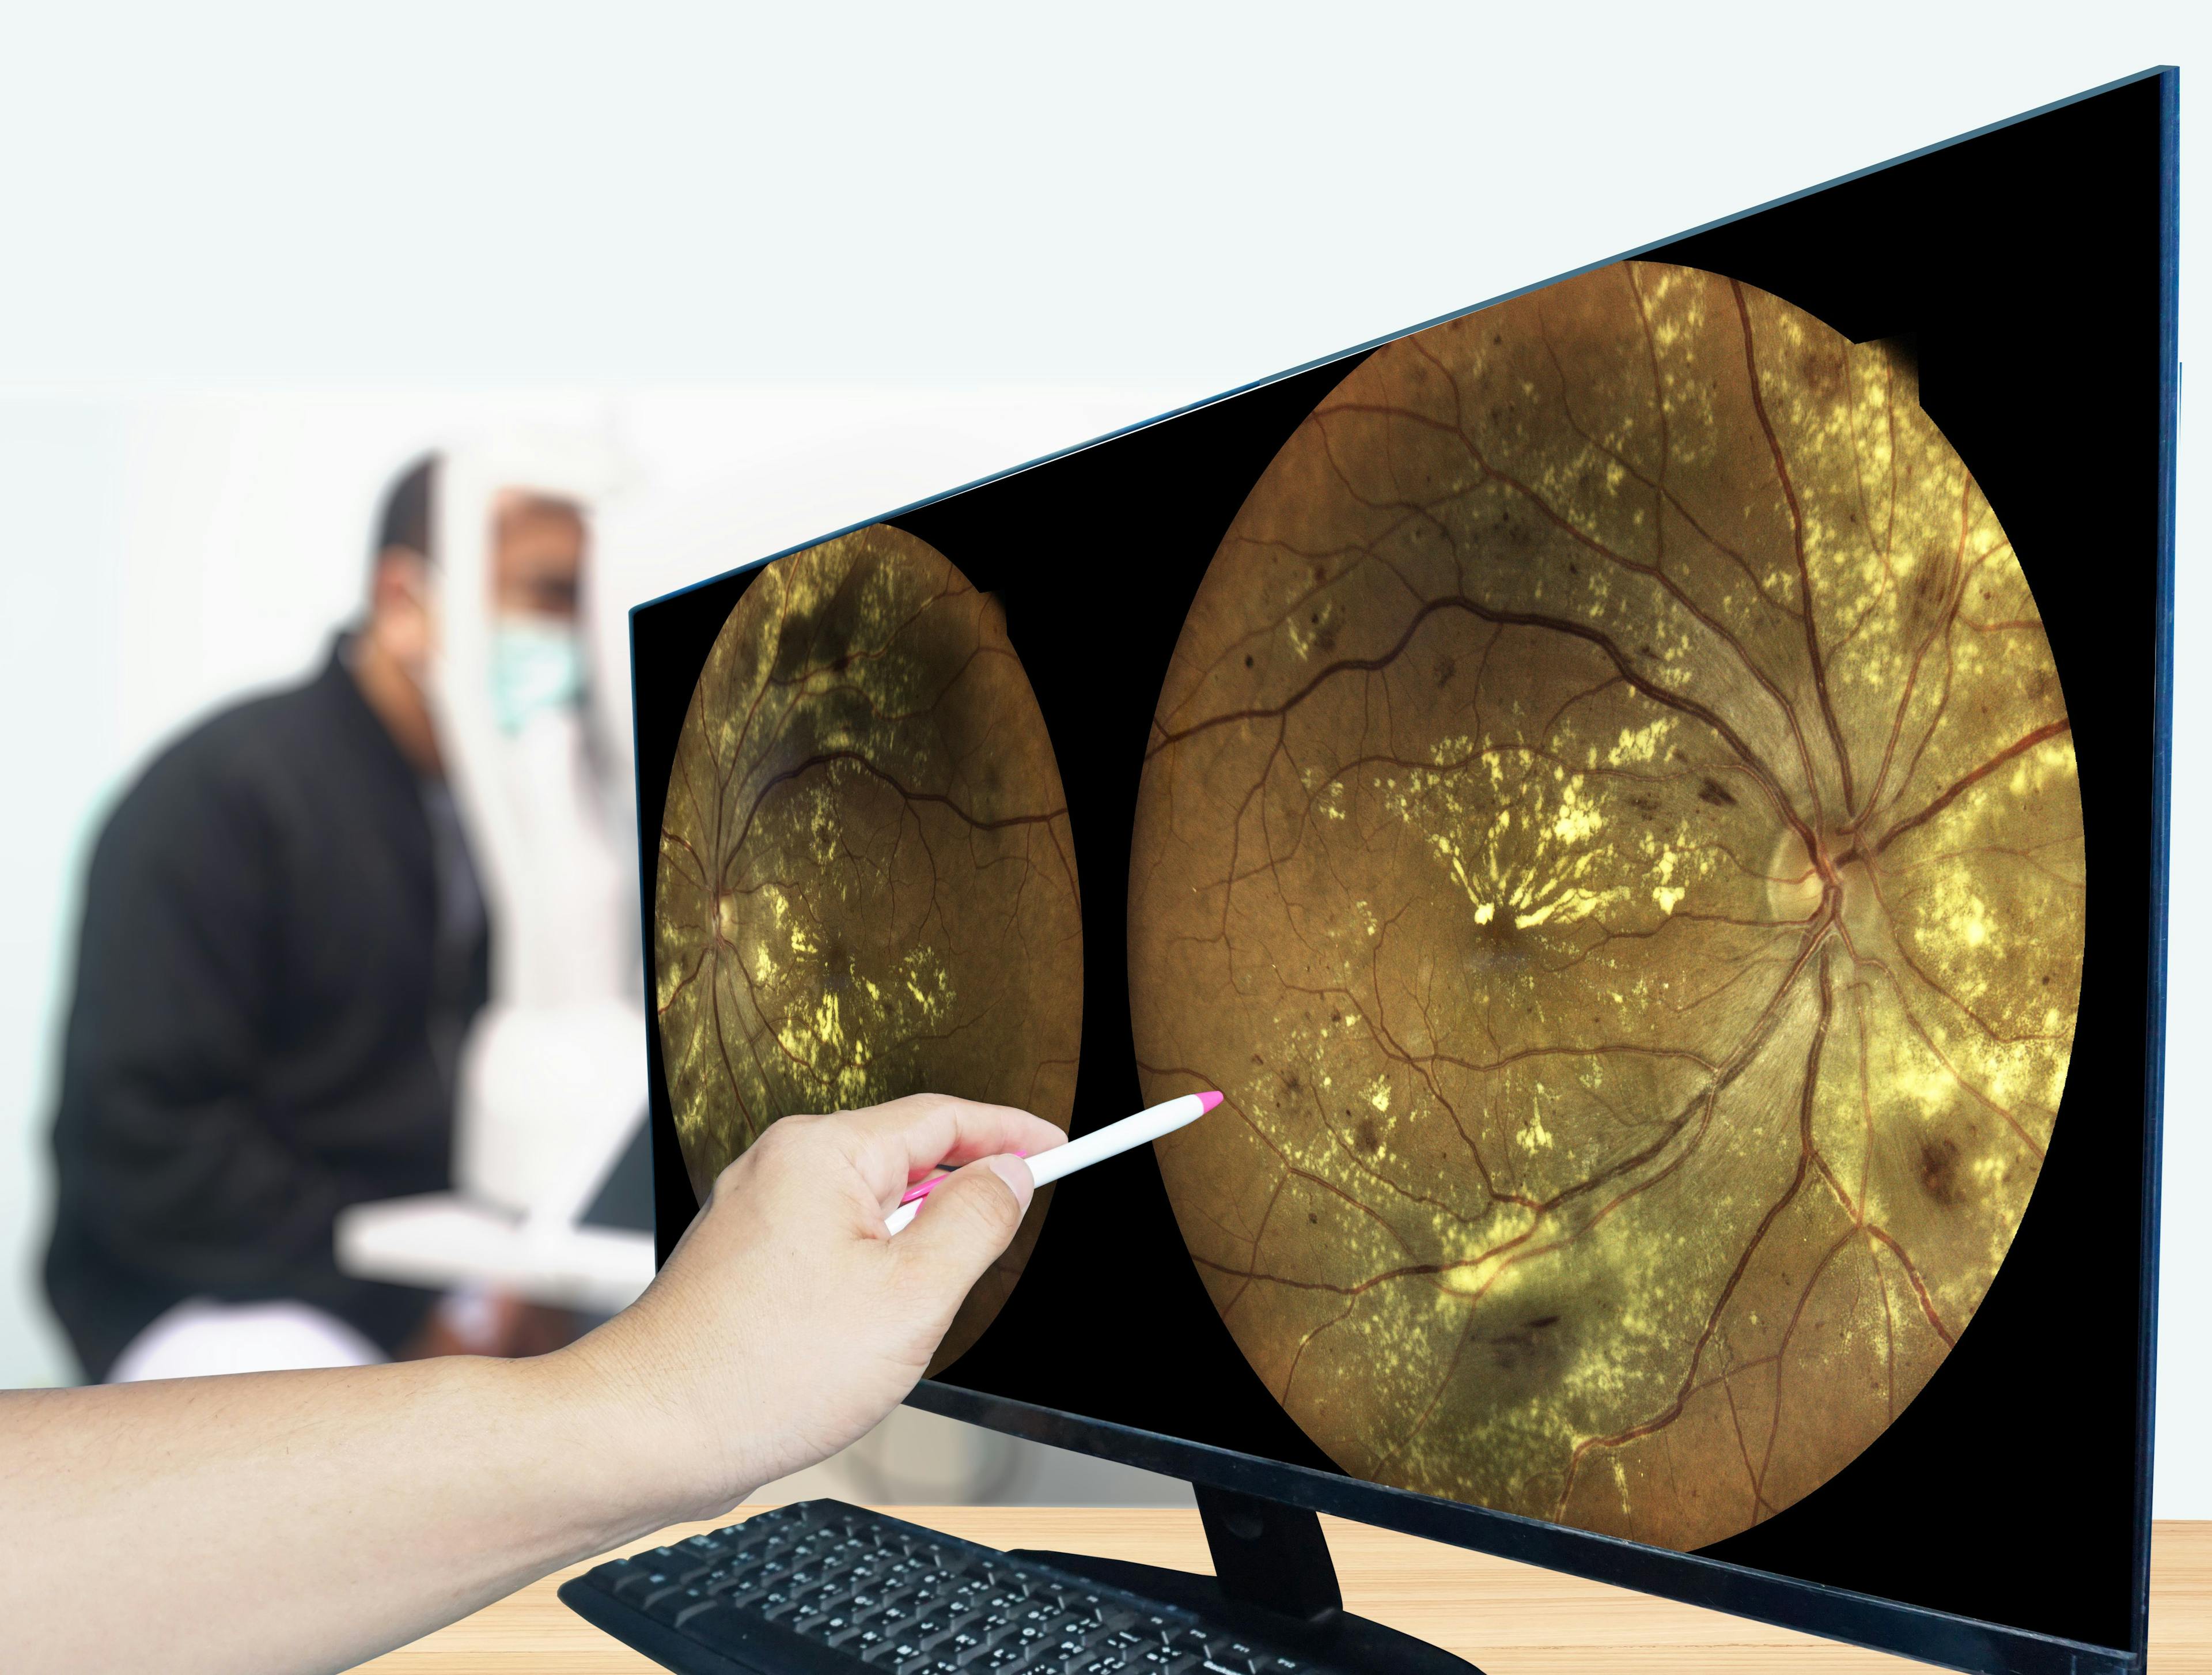 Early fundus findings of DR include microaneurysms, intraretinal hemorrhages, cotton wool spots, and exudation. (Adobe Stock image)